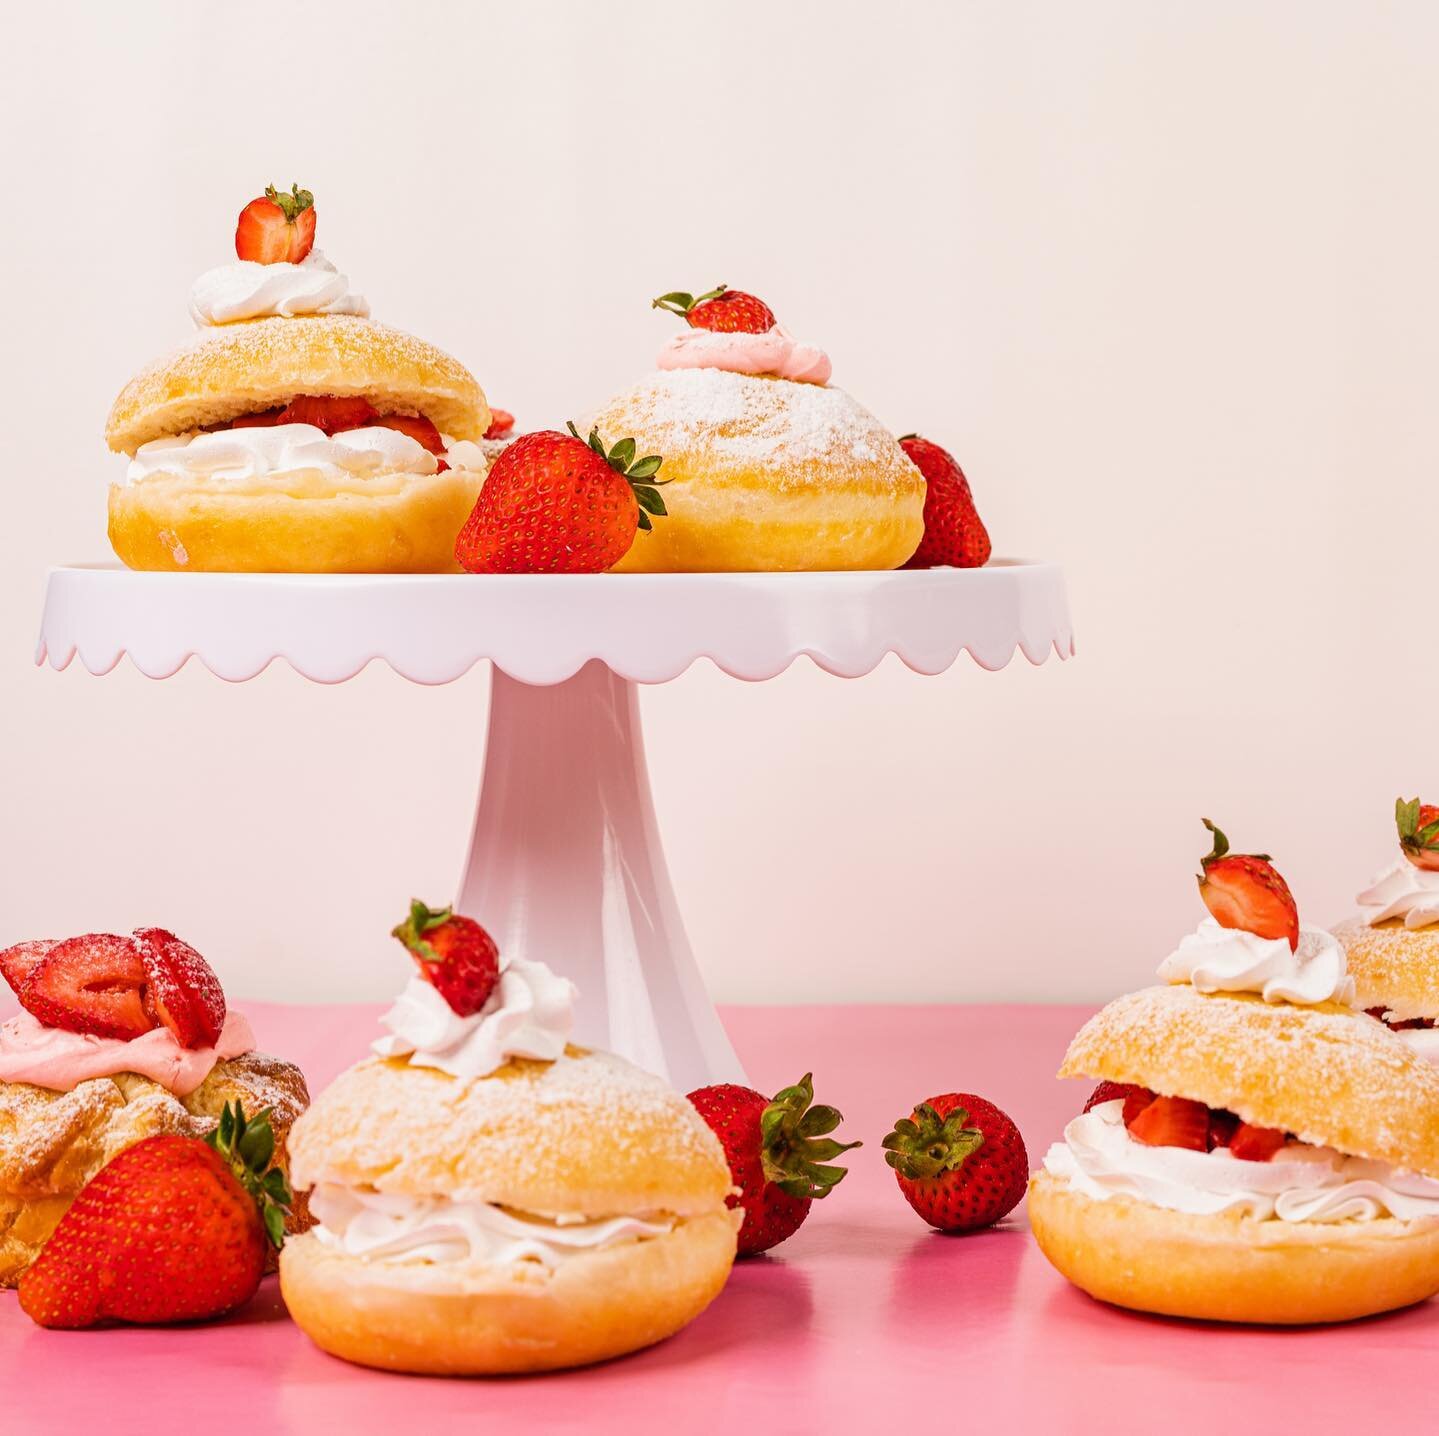 Are you a strawberry fanatic? We've got 4 fresh picks you'll like *berry* much!

🍓 Strawberry Glazed Donut
🍓 Strawberry Shortcake Donut
🍓 Strawberry Cream Donut
🍓 Strawberry Coconut Mochi Donut

Tell us which one is calling your name 👇